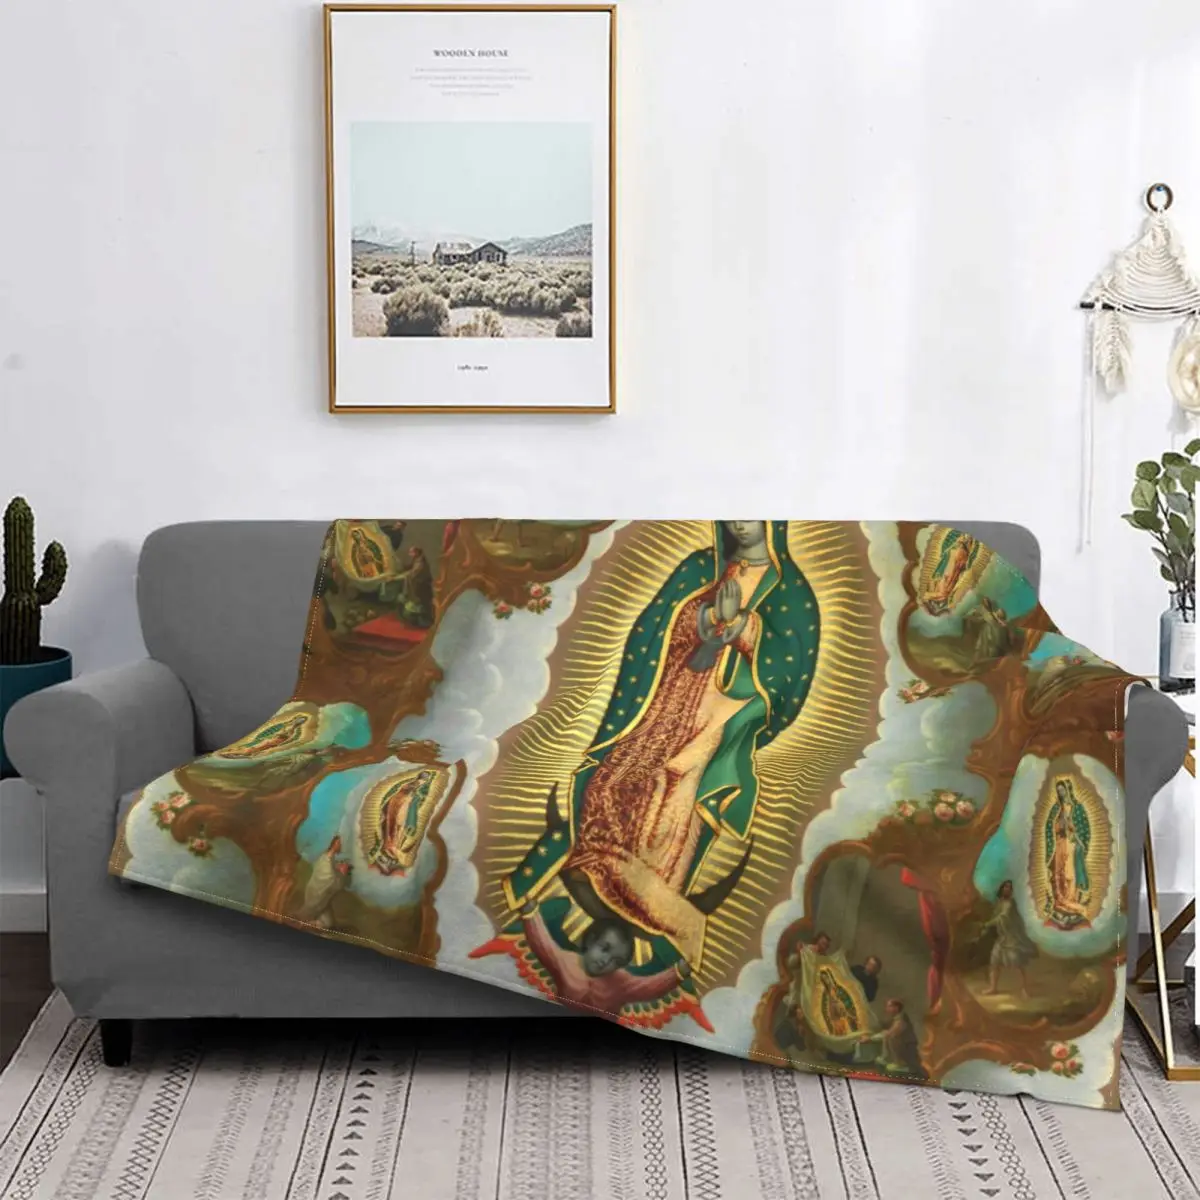 

Lady Of Guadalupe Virgin Mary Catholic Mexico Blankets Soft Flannel 3D Print Our Religious Throw Blanket for Sofa Office Bedding